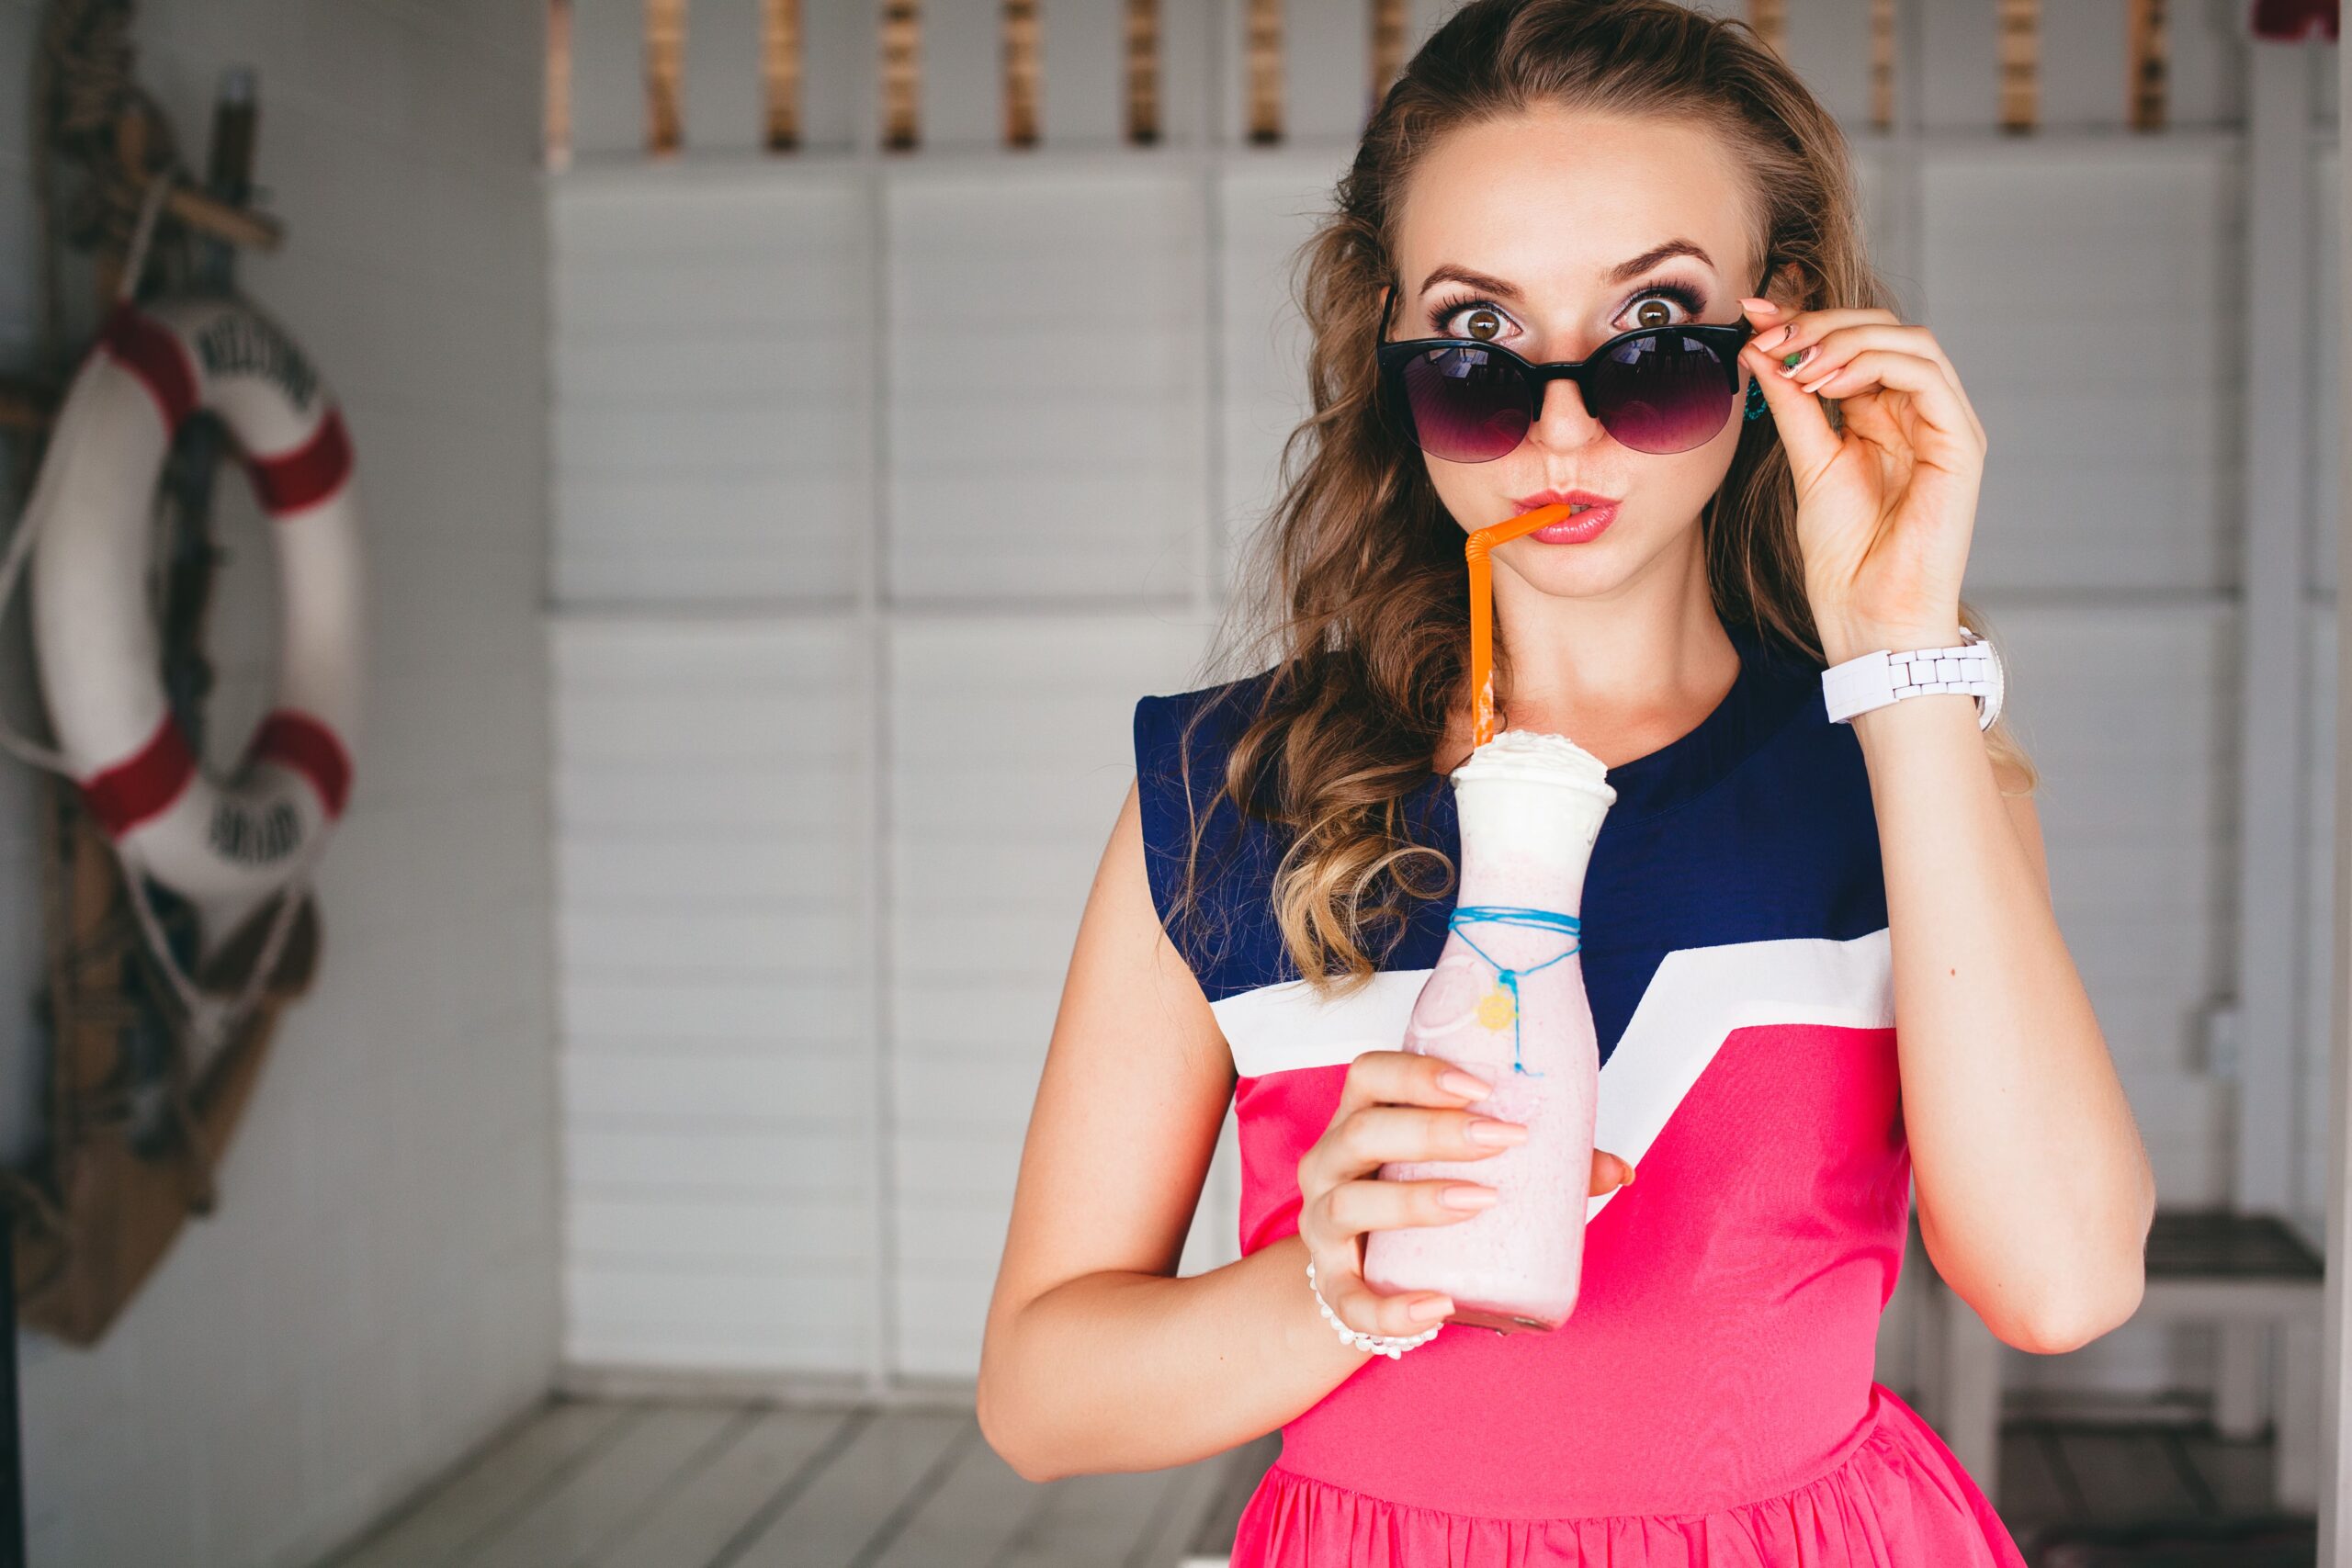 young-stylish-beautiful-woman-in-sea-cafe-drinking-cocktail-smoothie-sunglasses-flirty-resort-style-fashionable-outfit-smiling-marine-colors-dress-anchor-and-lifebuoy-on-background-shocked-min